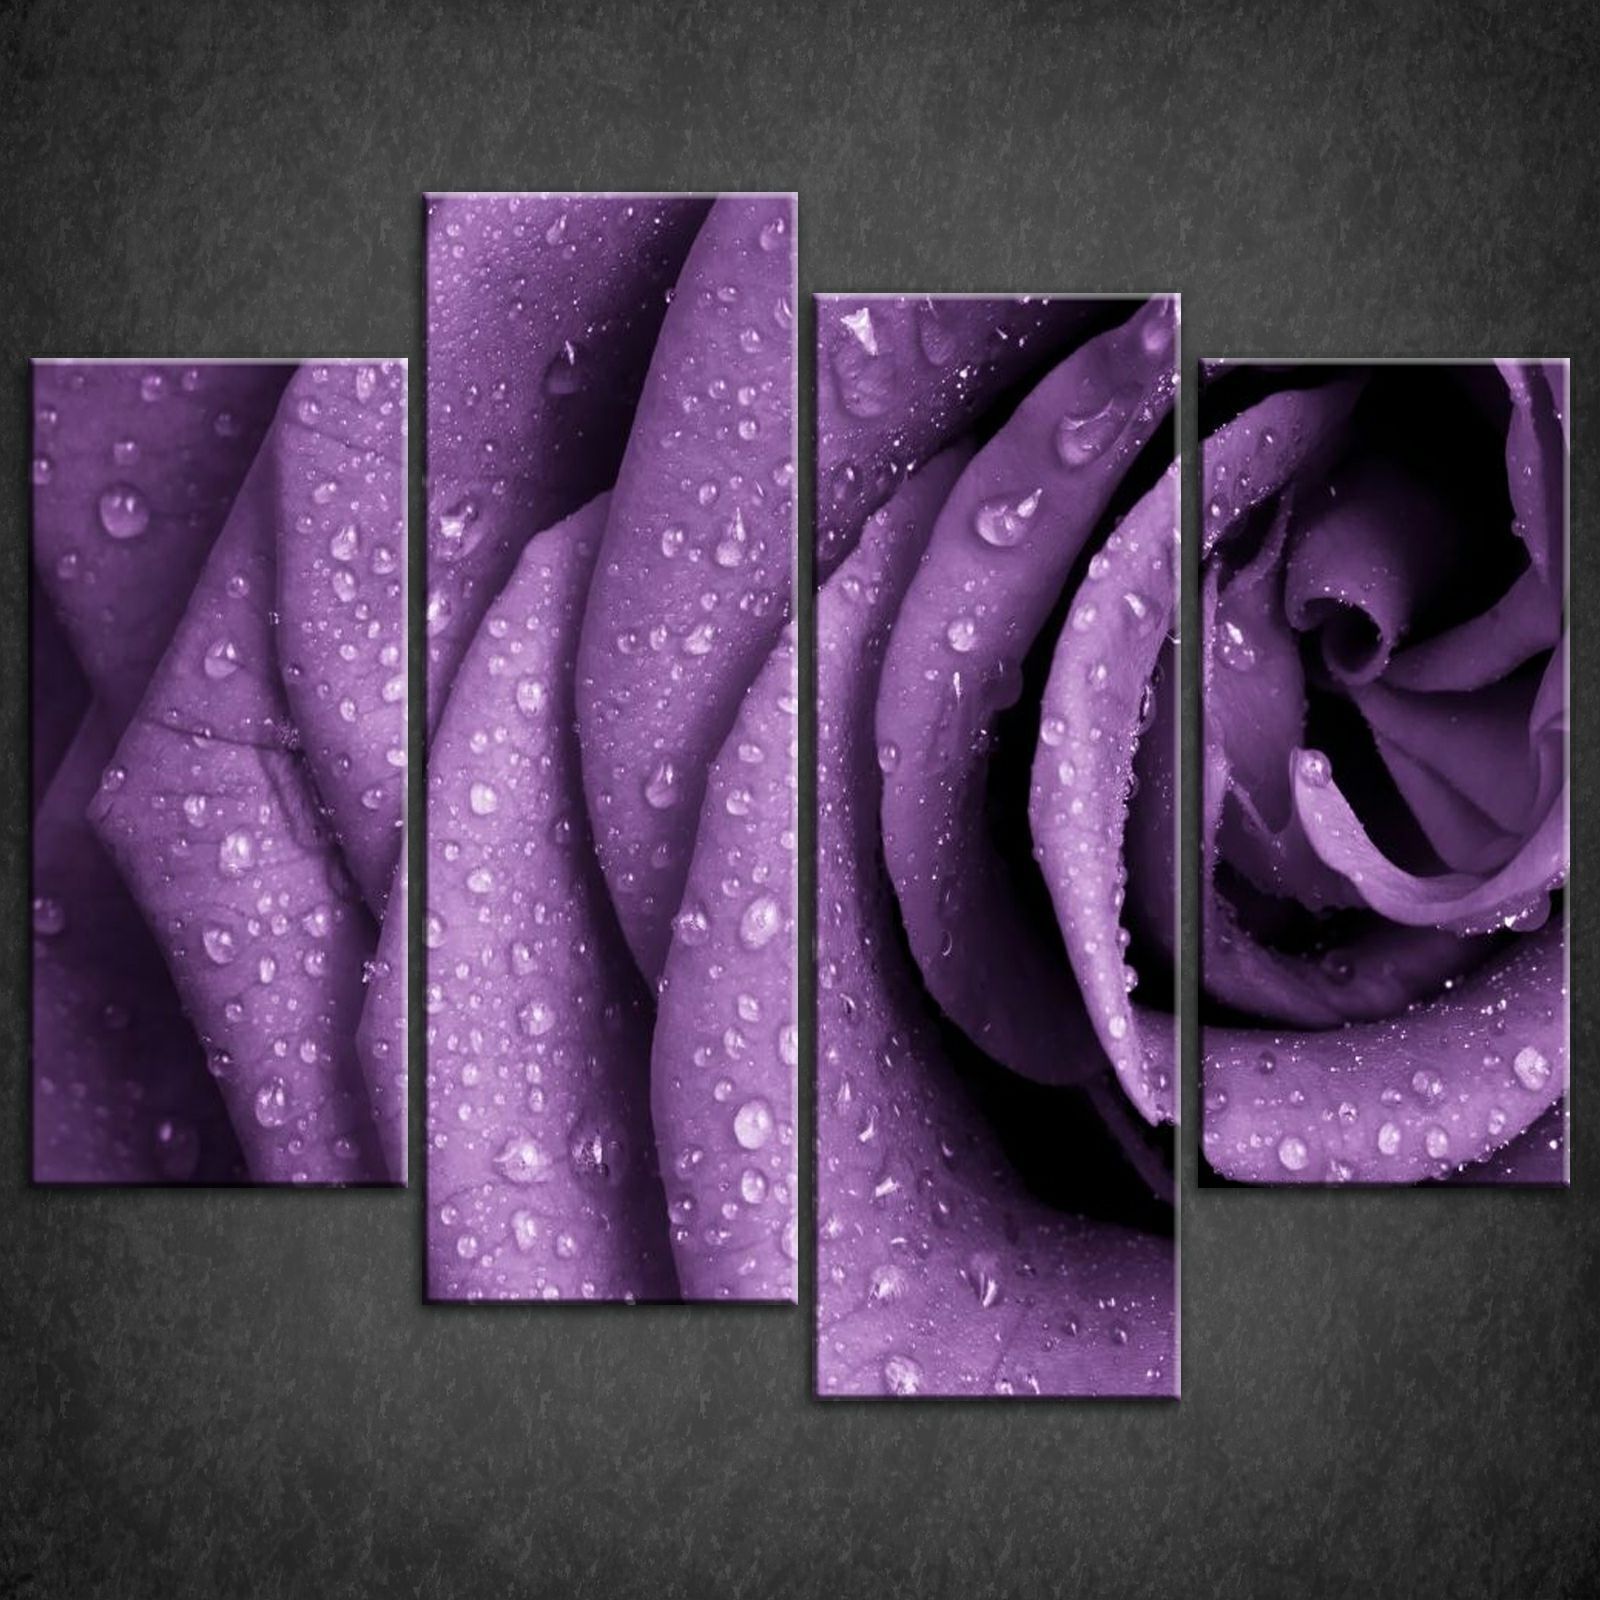 Roses Canvas Wall Art Intended For Recent Wall Art: Beautiful Gallery Purple Wall Art Canvas Purple Wall Art (View 7 of 15)